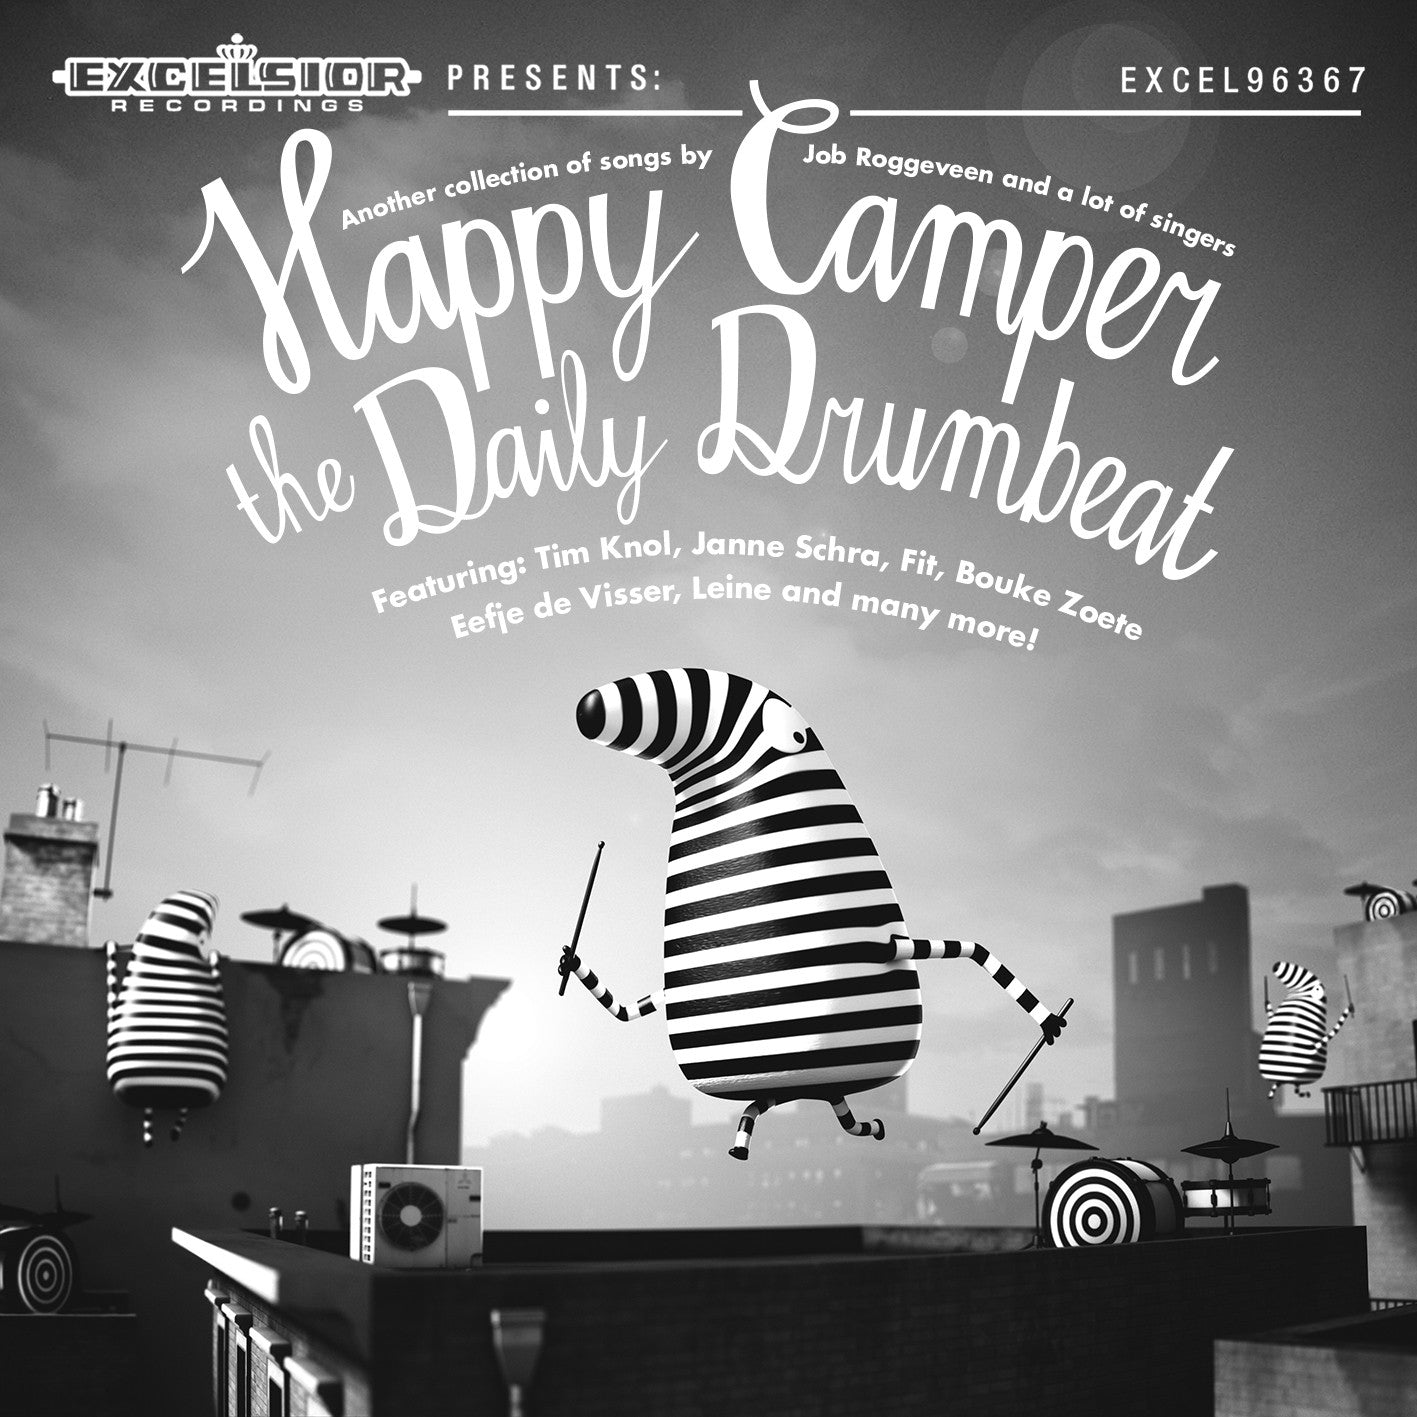 Happy Camper - Daily Drumbeat